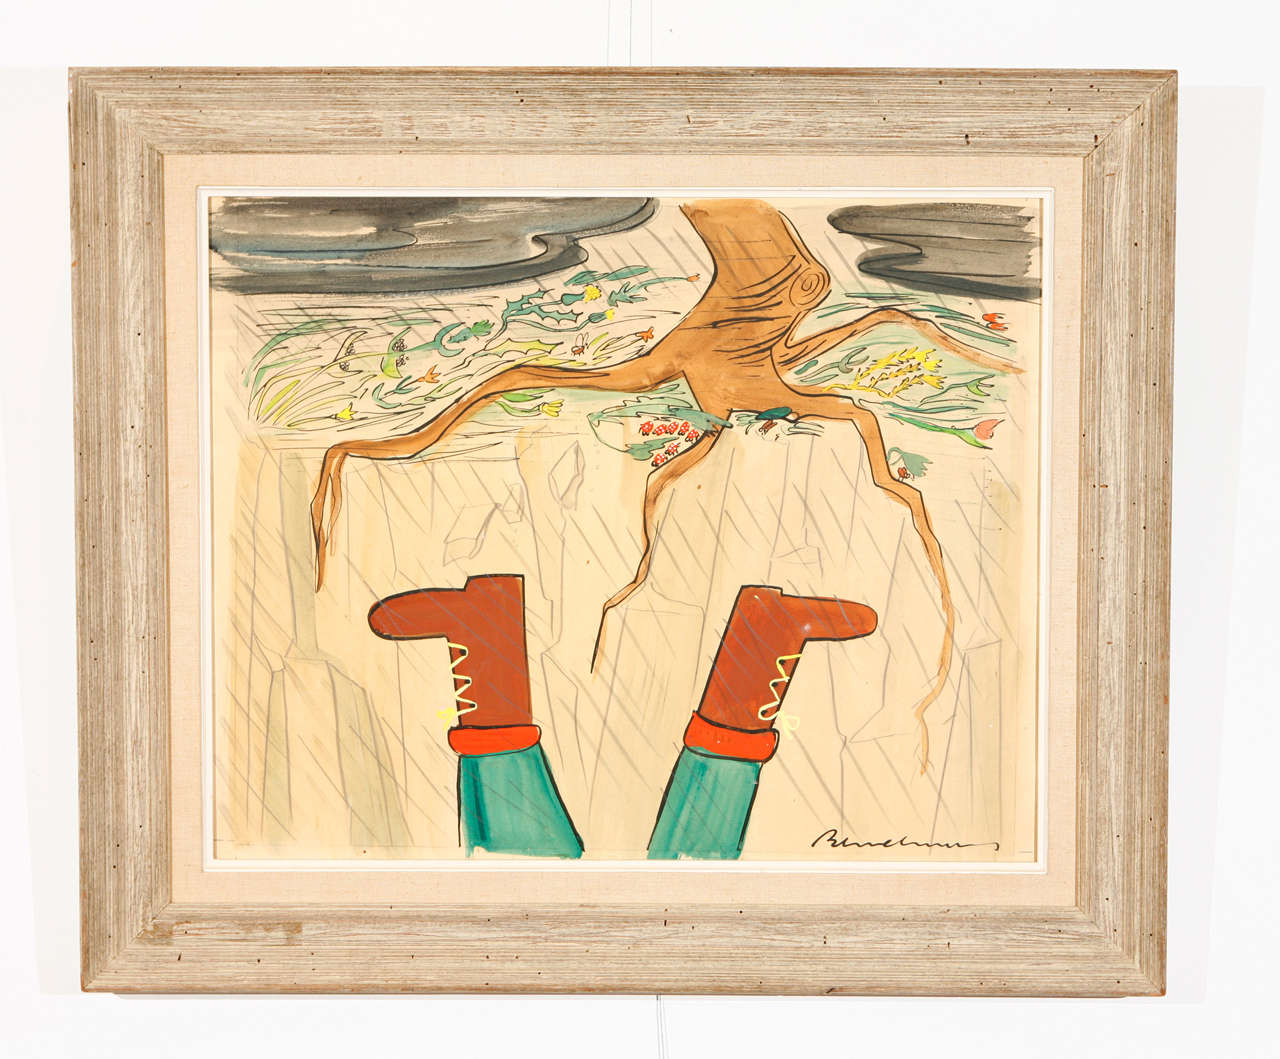 A charming pair of original paintings by Ludwig Bemelmans that were used as illustrations for his children's book 